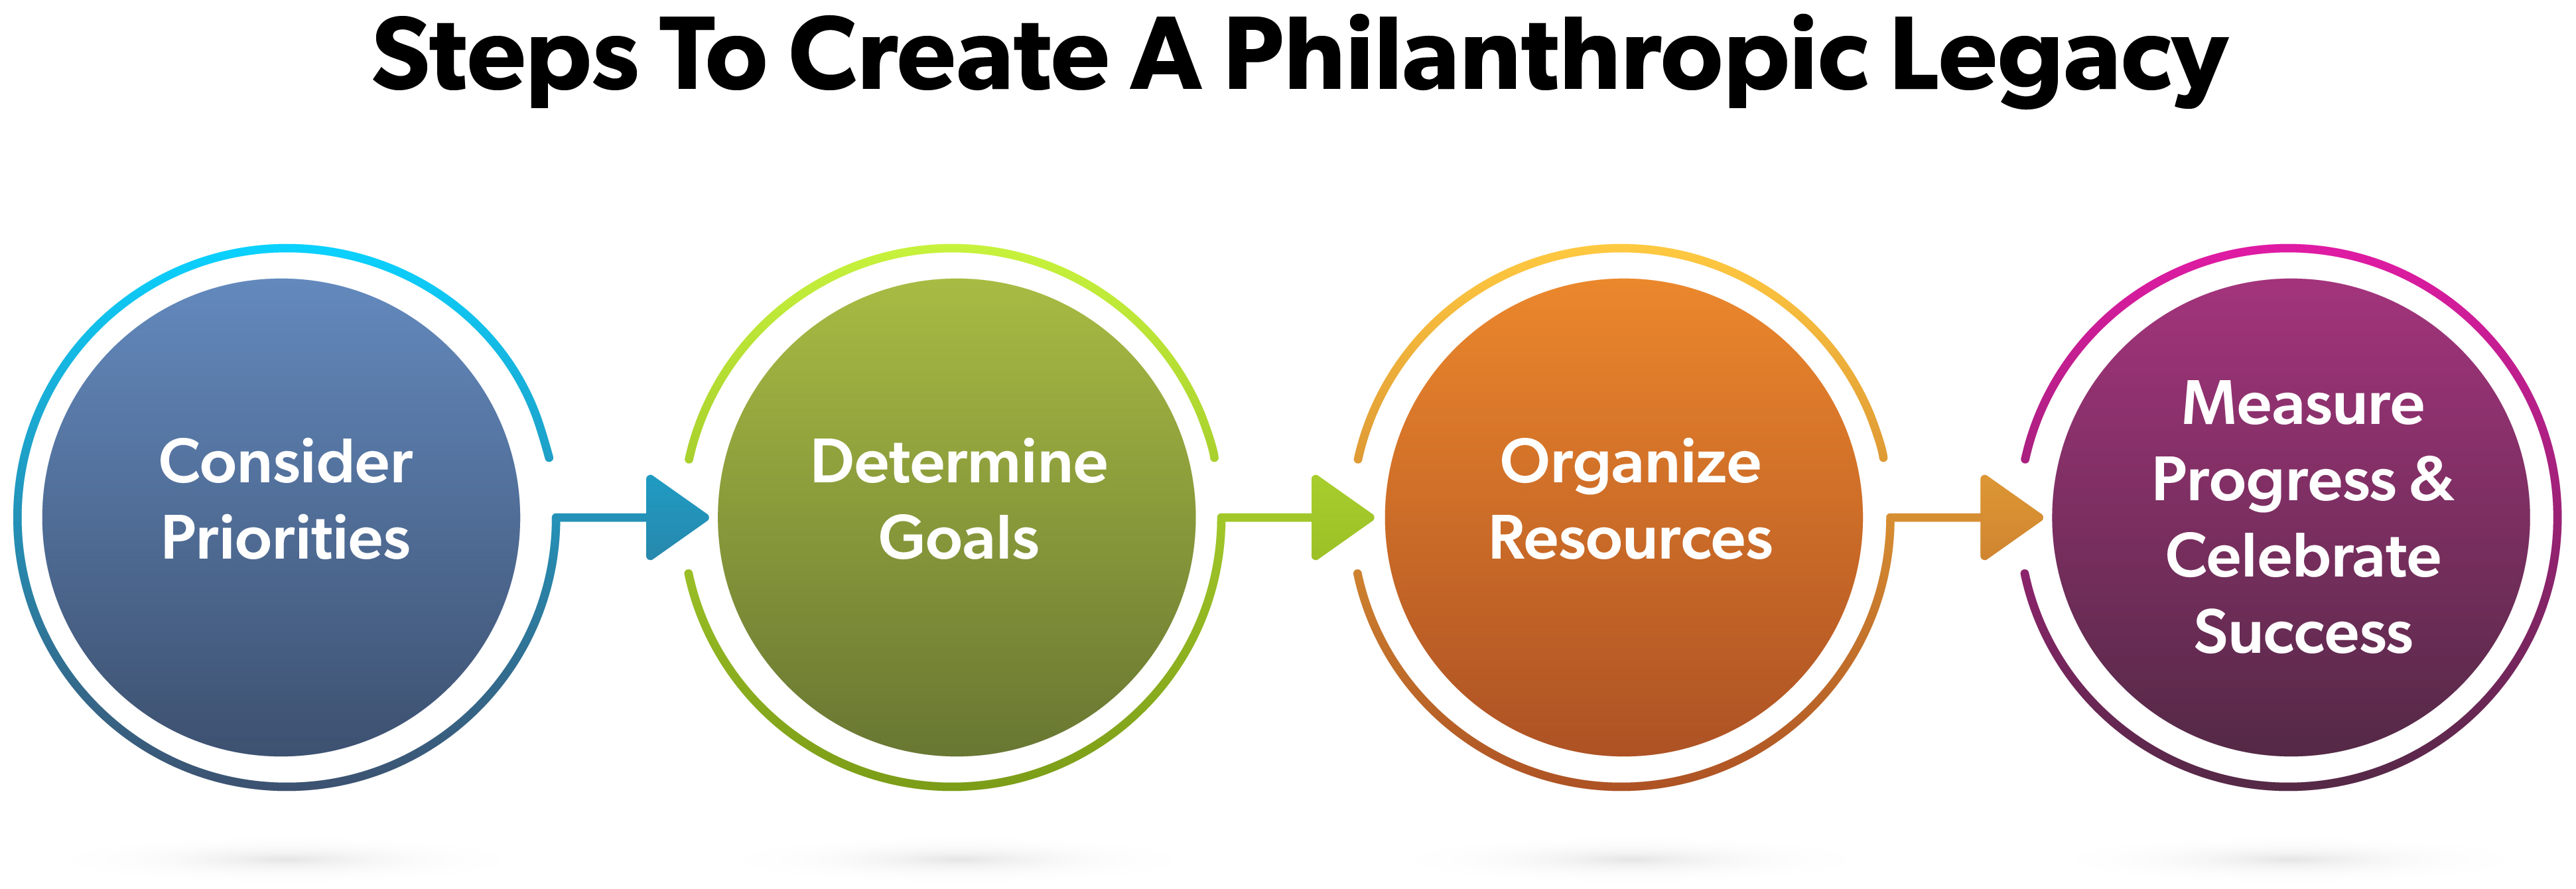 image of the steps to create a philanthropic legacy plan